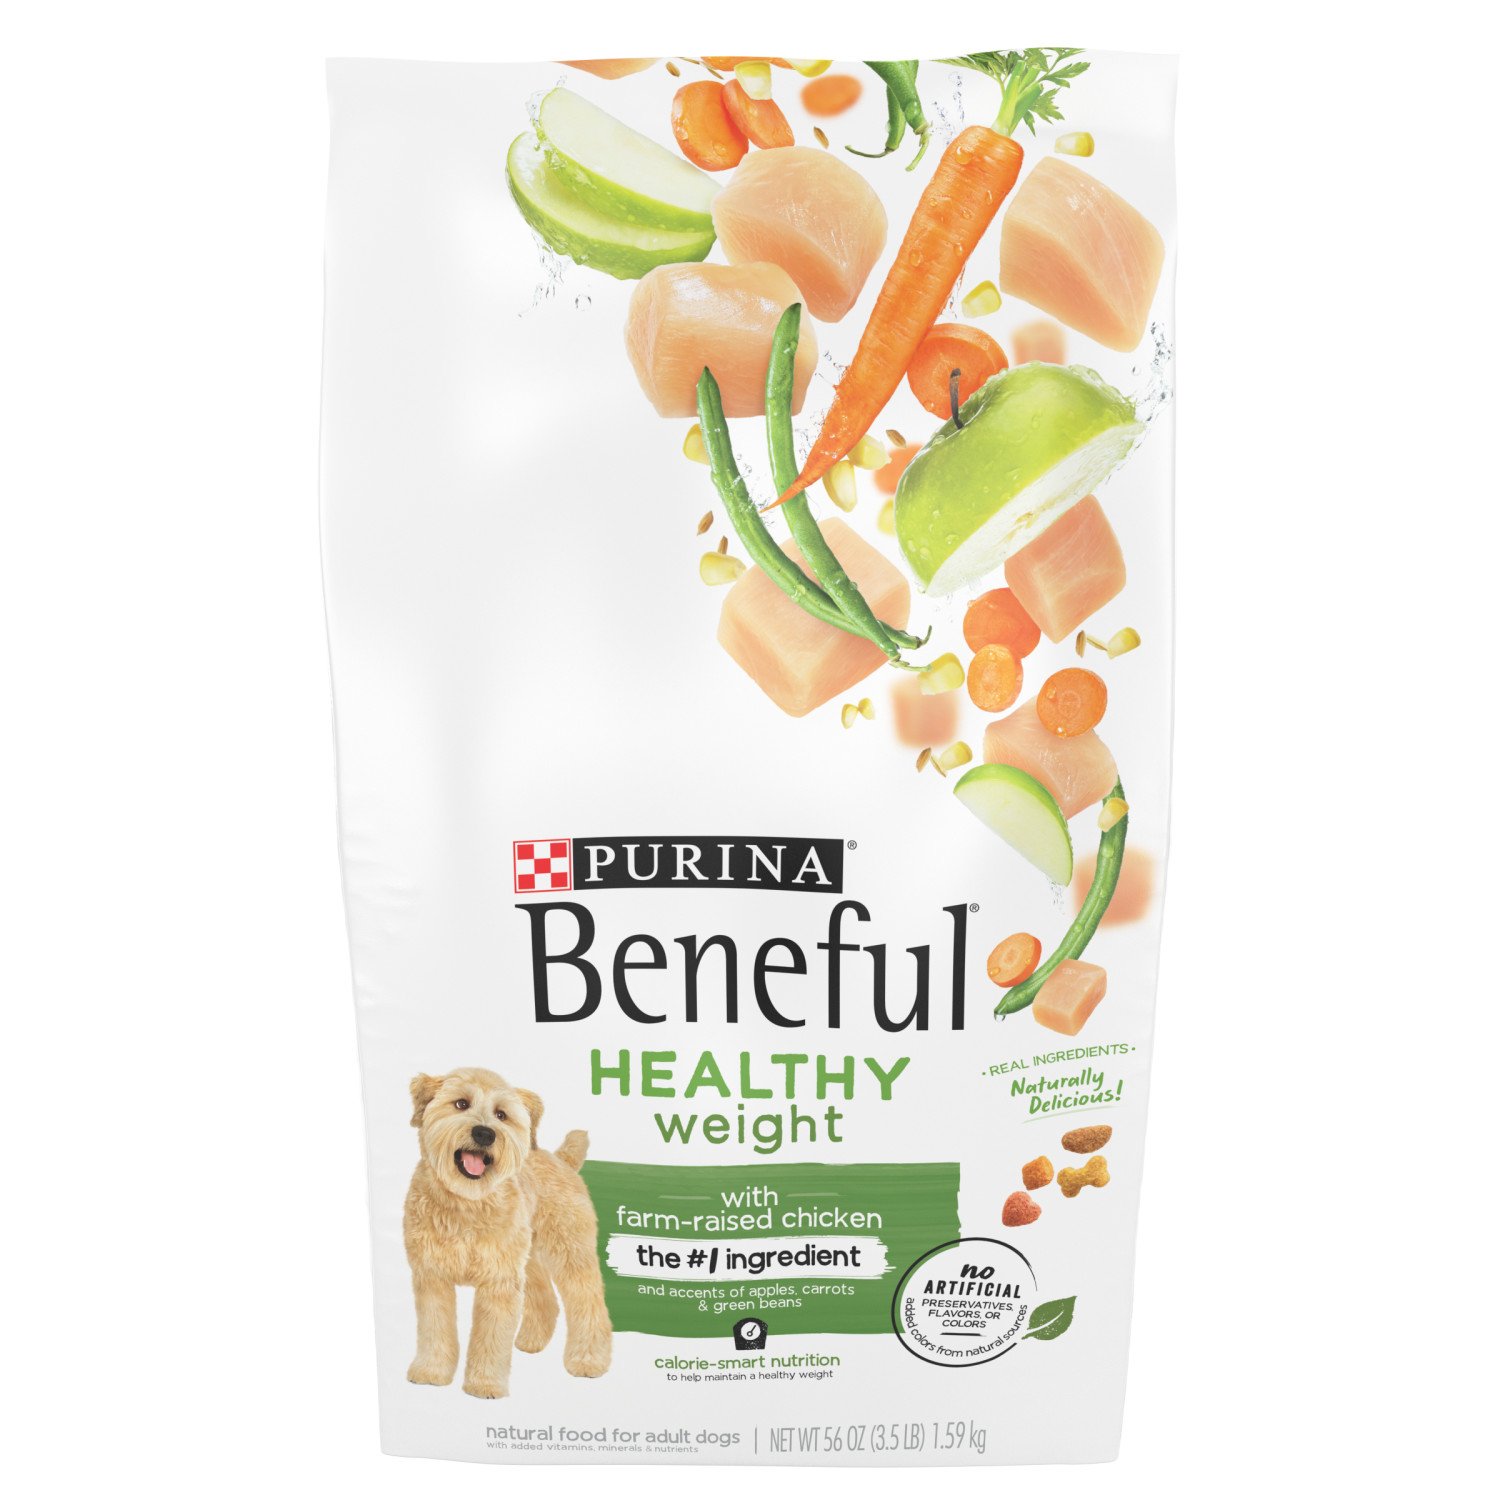 is-purina-a-good-dog-food-10-best-purina-dog-foods-of-2021-reviews